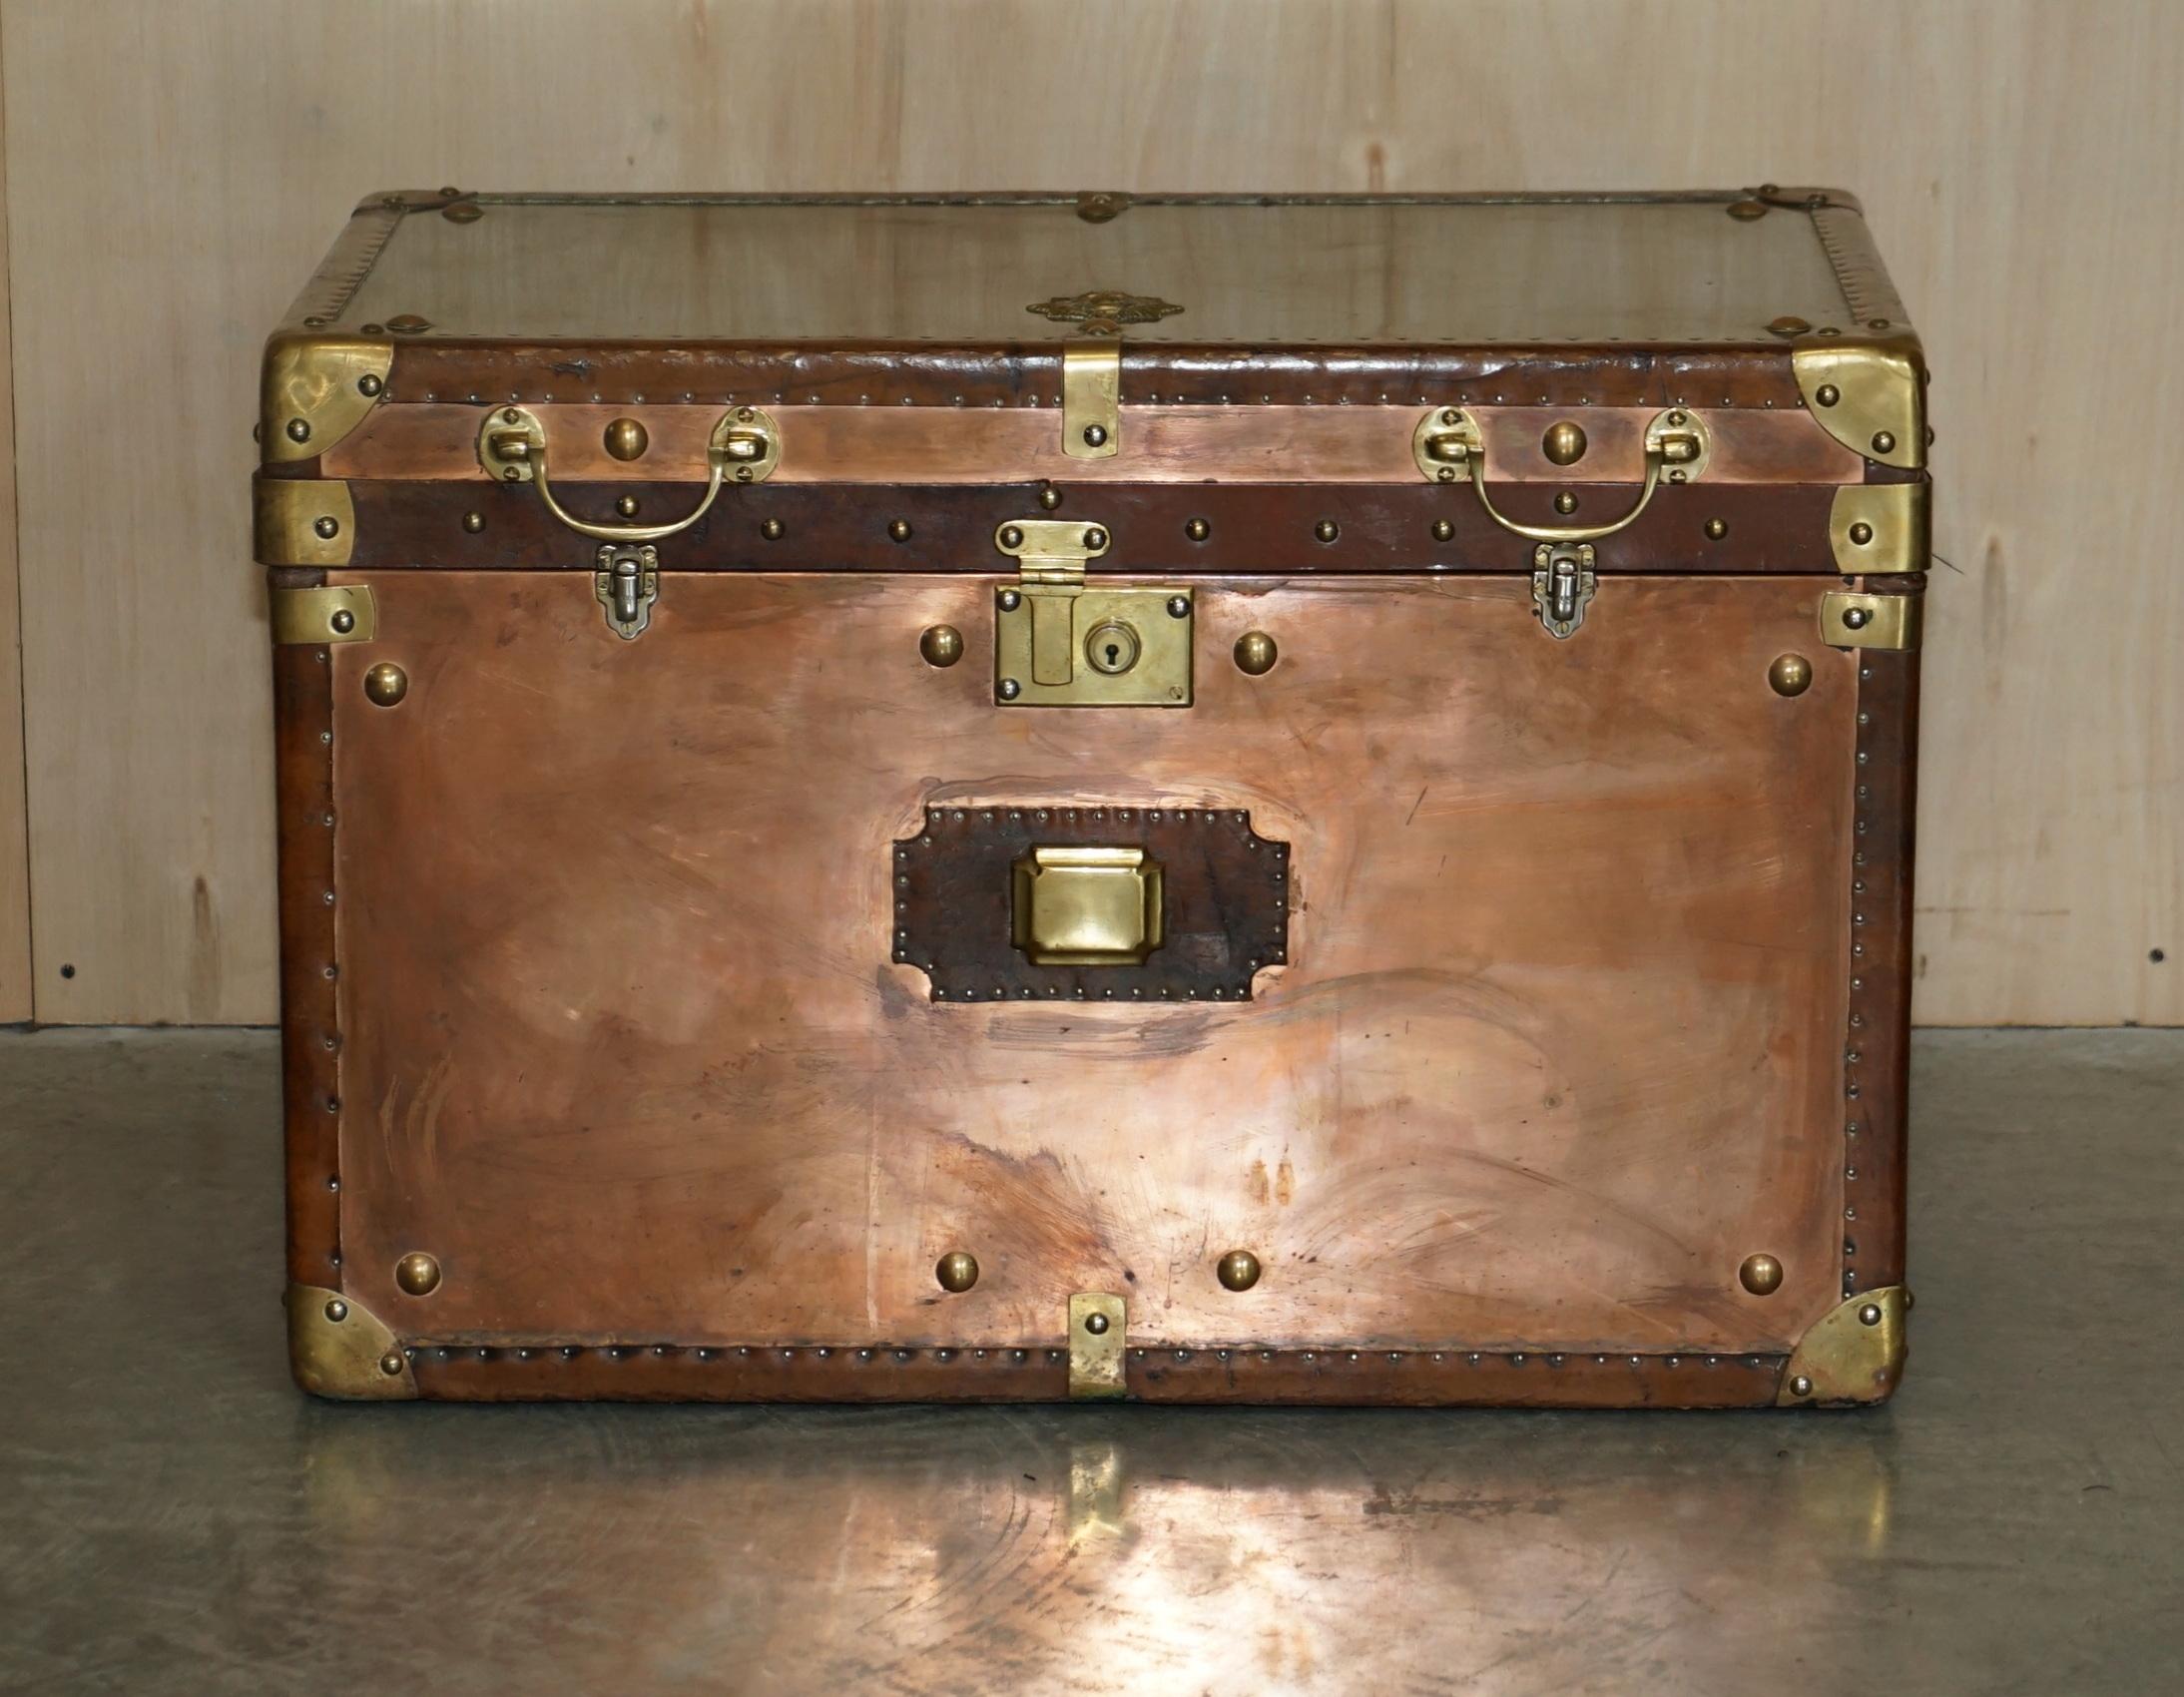 Royal House Antiques

Royal House Antiques is delighted to offer for sale this lovely vintage Royal Marines campaign chest in copper and brass with a plaque to the top reading “Per Mare Per Terram” which is Latin for by sea by land, the motto of the